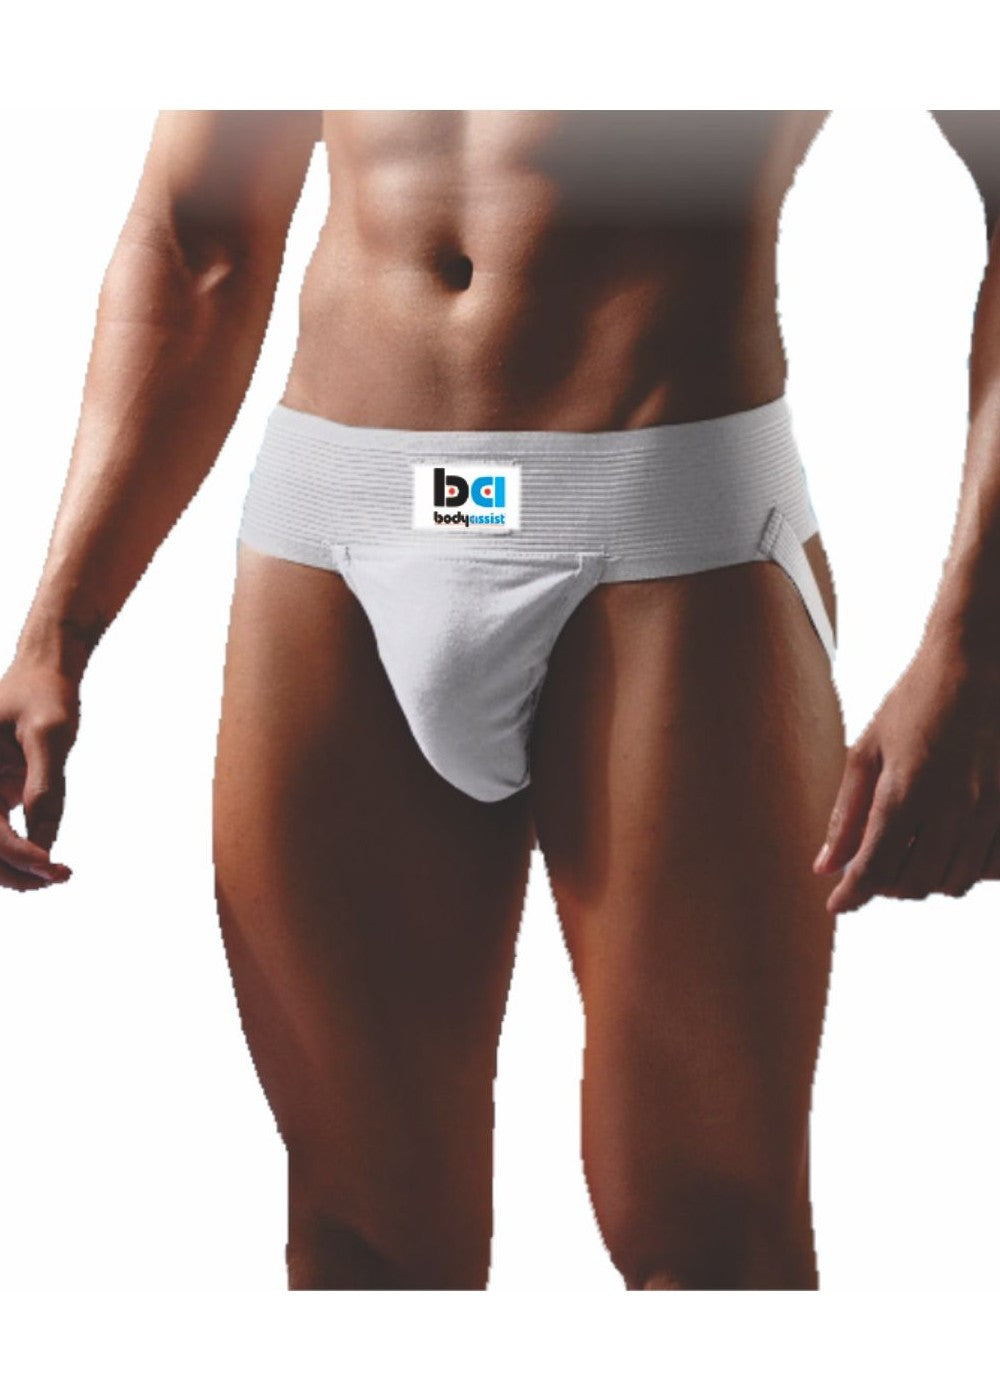 Body Assist White Athletic Supporter Jock Strap 540 - Large